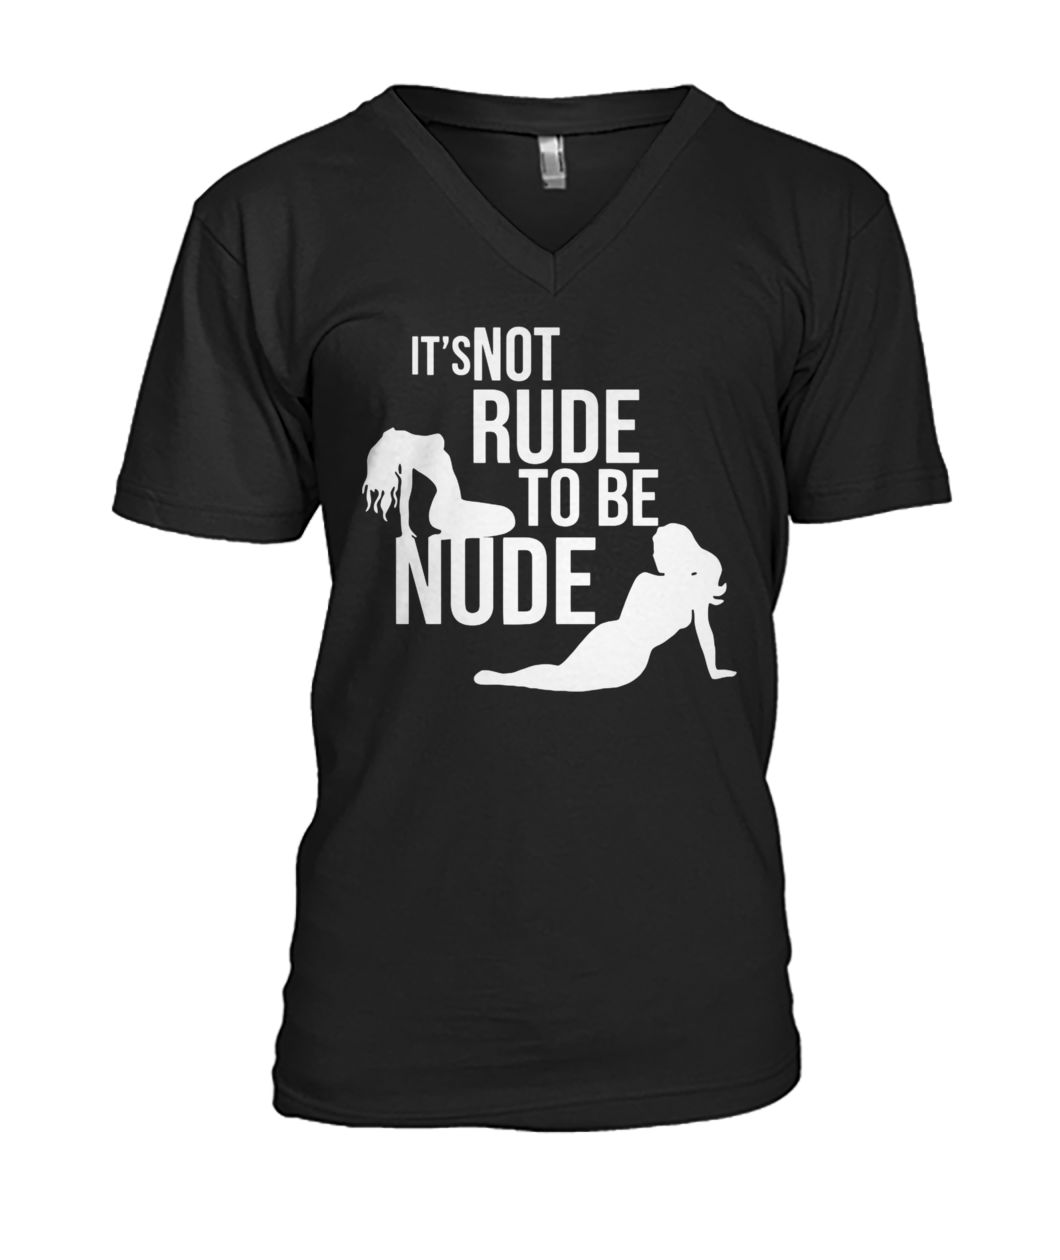 It's not rude to be nude mens v-neck